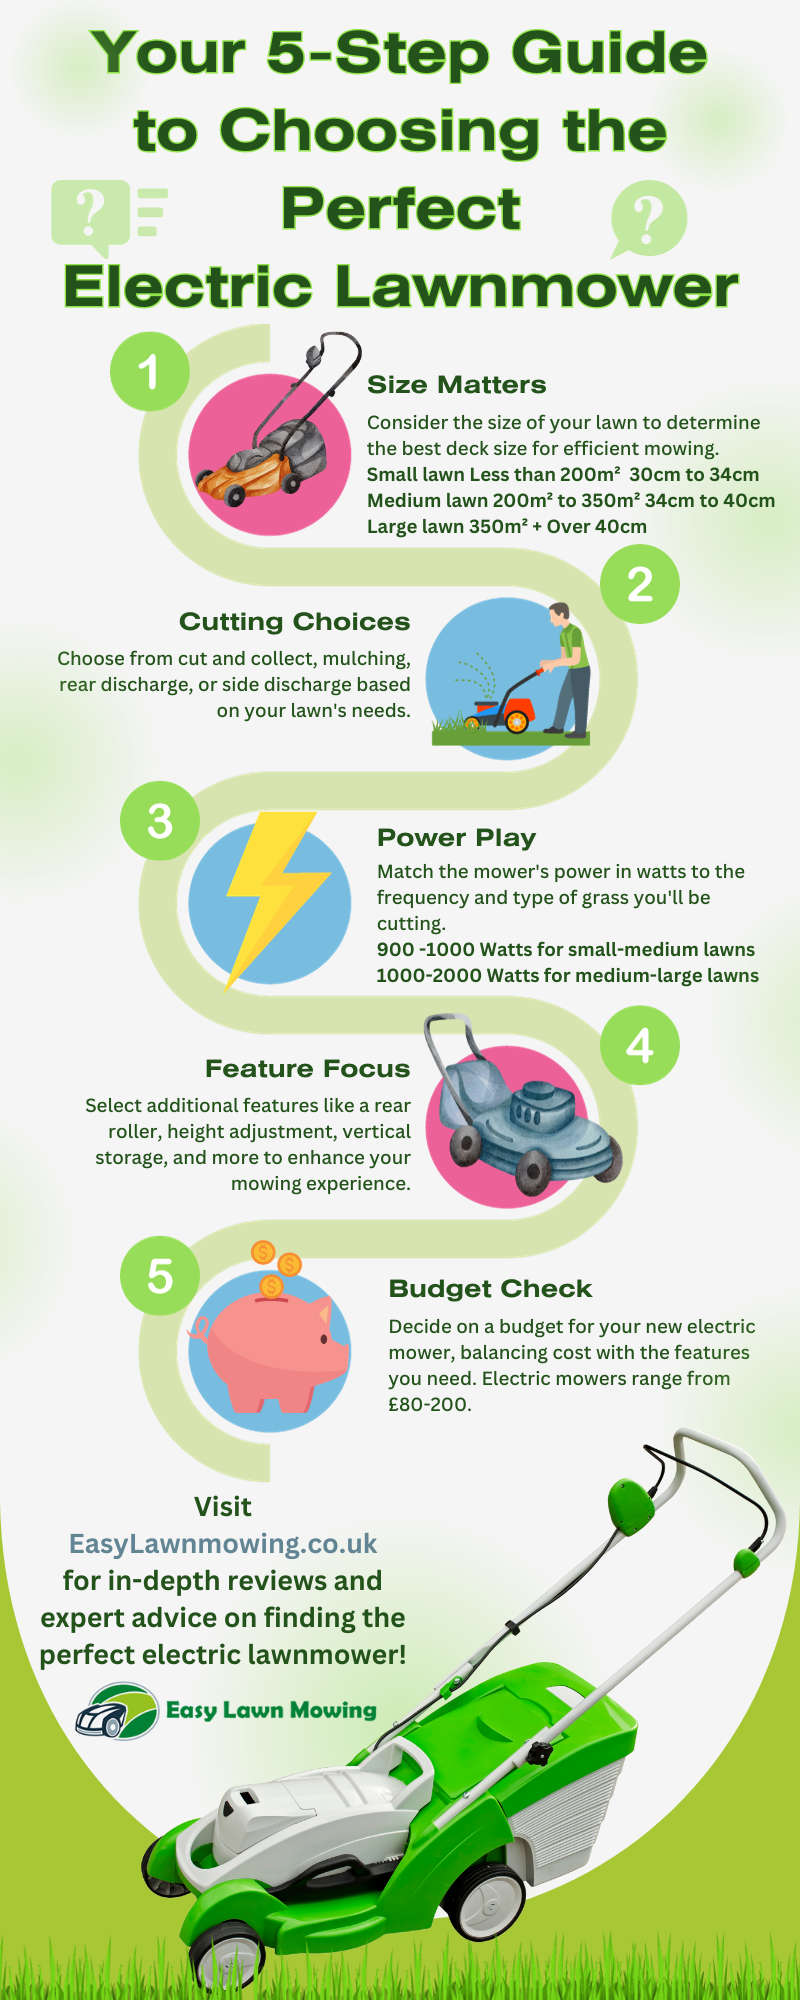 Your 5-Step Guide to Choosing the Perfect Electric Lawnmower Infographic